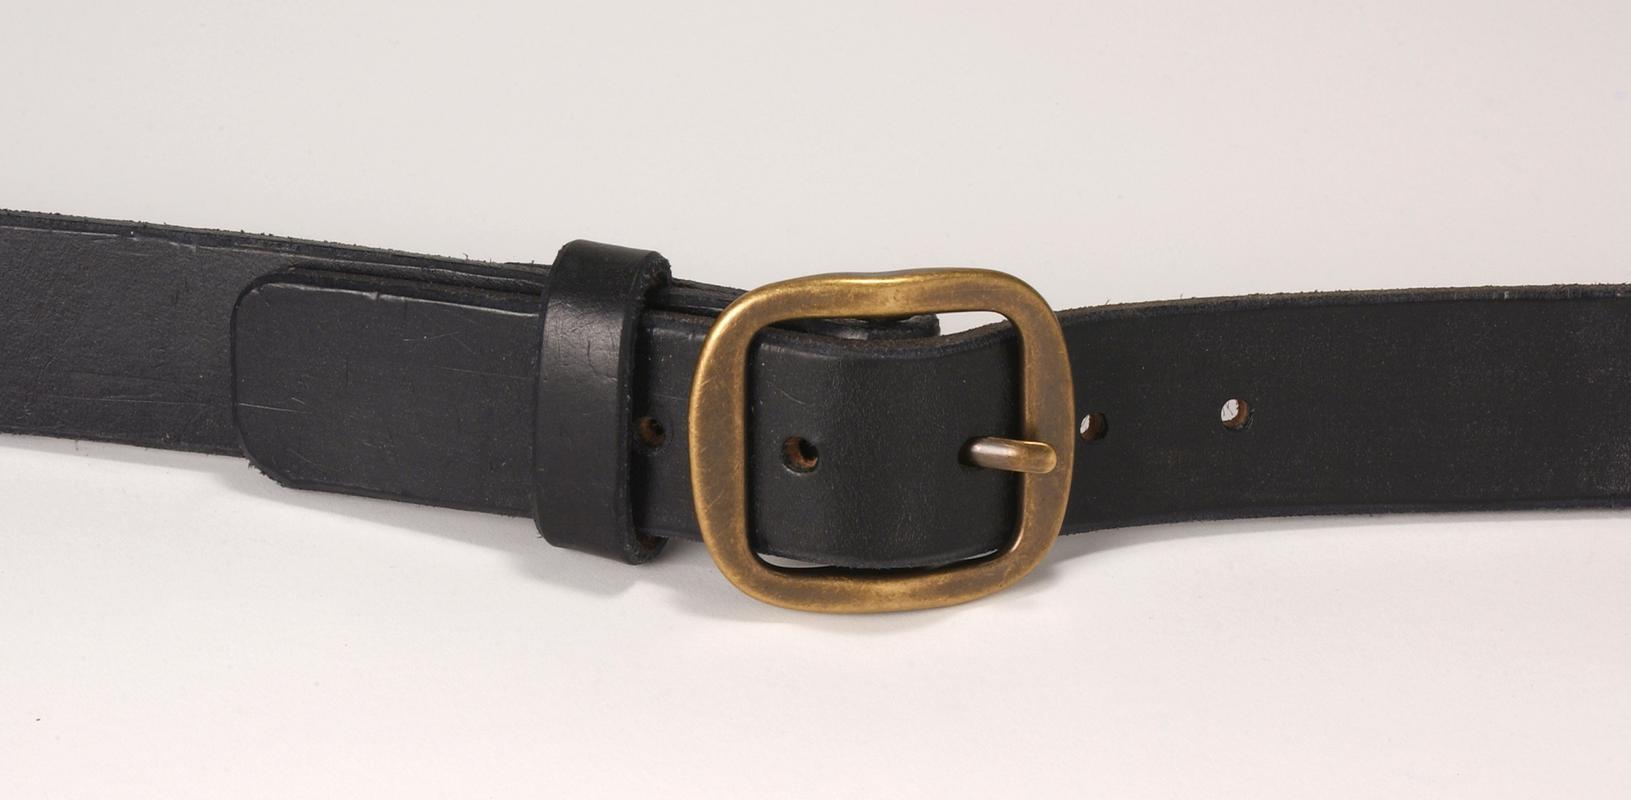 Replica 18th century brass buckle (on a leather belt)